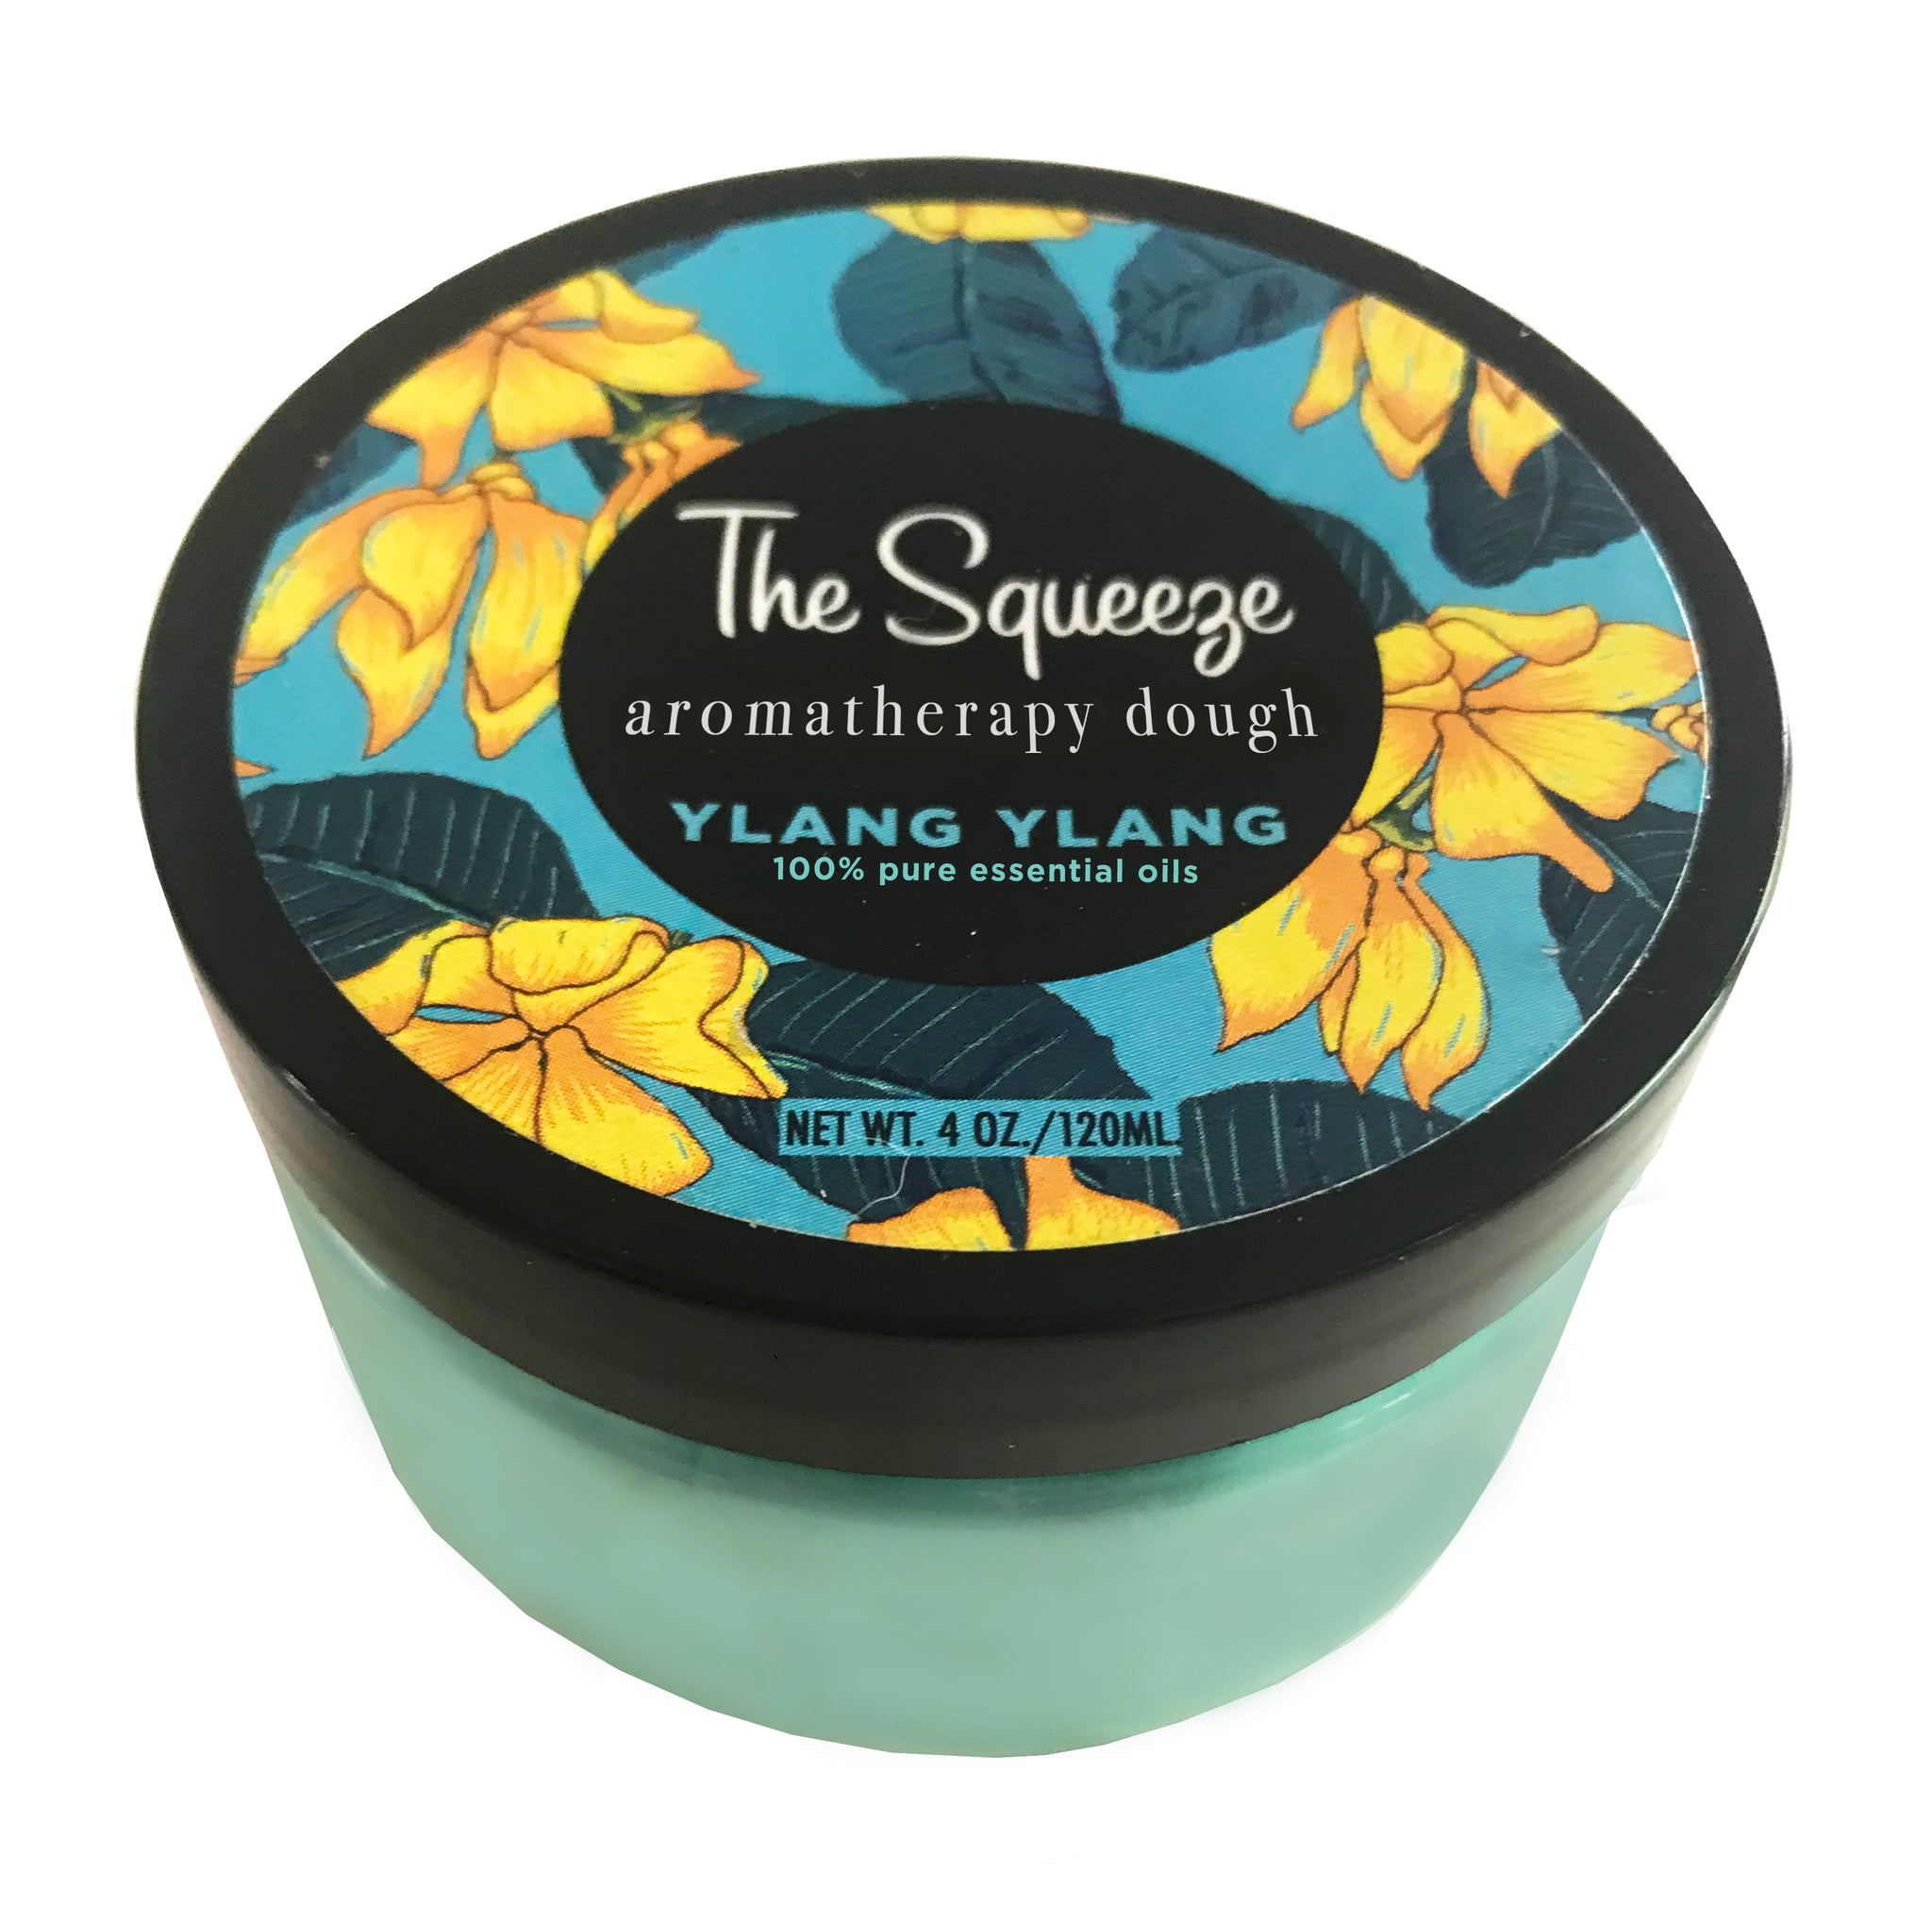 The Squeeze - Ylang Ylang 100% essential oil stress relief dough for self care, aromatherapy stress ball, stress relief FREE SHIPPING